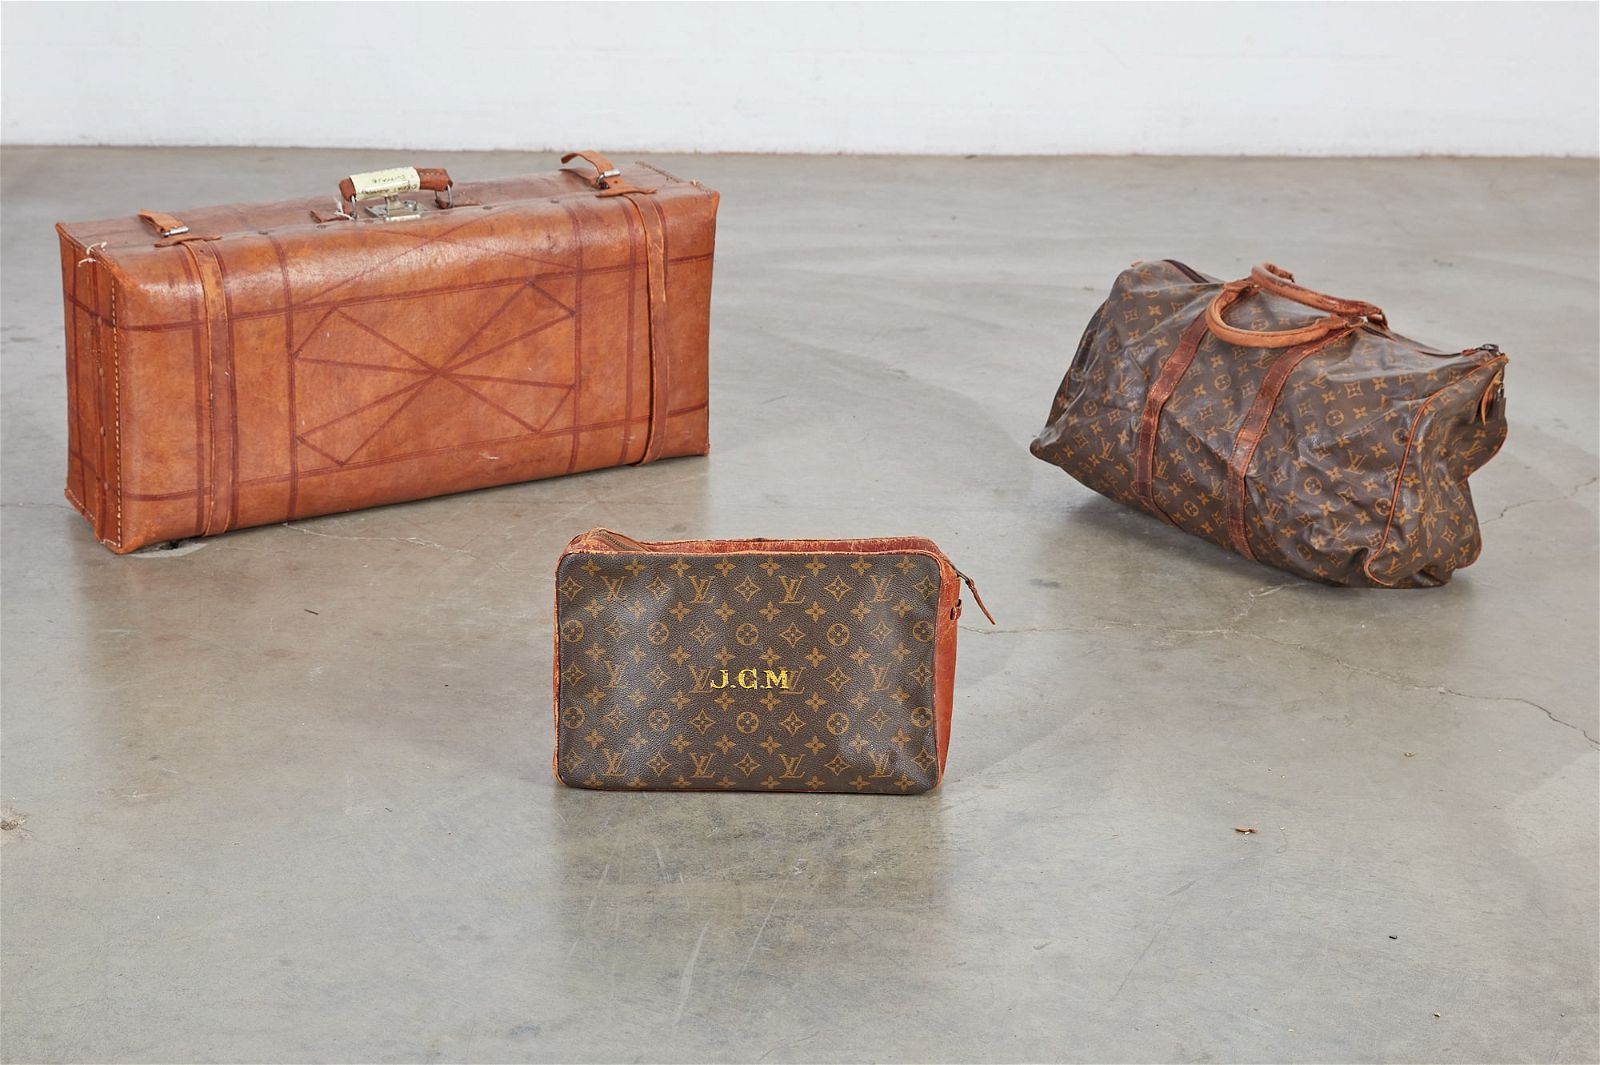 TWO PIECES OF LOUIS VUITTON LUGGAGETwo 2fb39d8